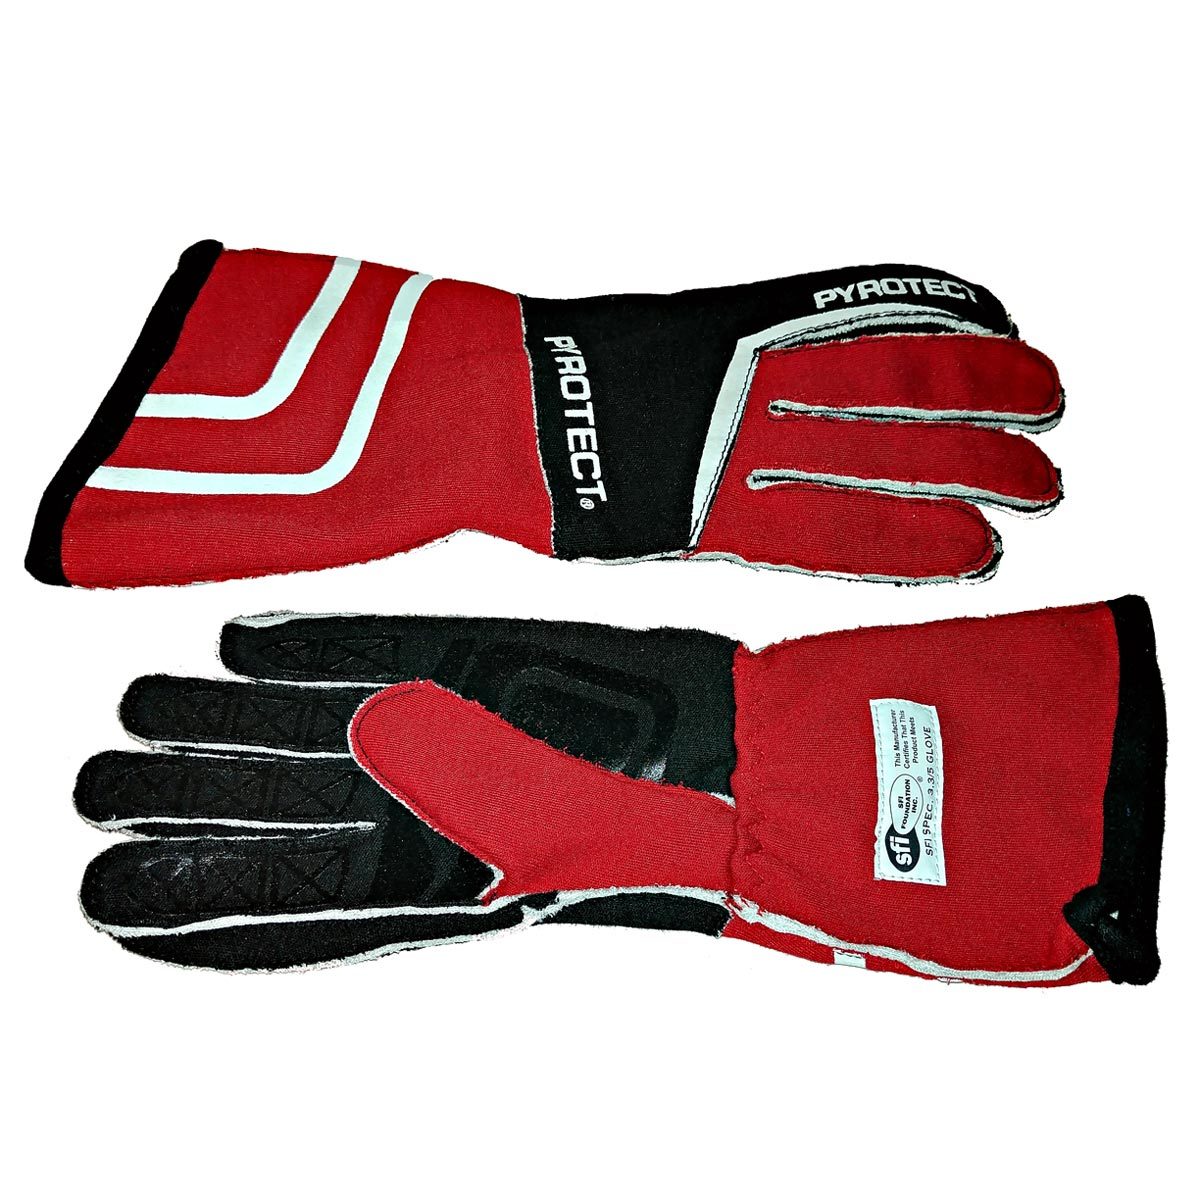 Pyrotect Glove Sport 2 Layer Blk/ Red Large SFI-5 Safety Clothing Driving Gloves main image